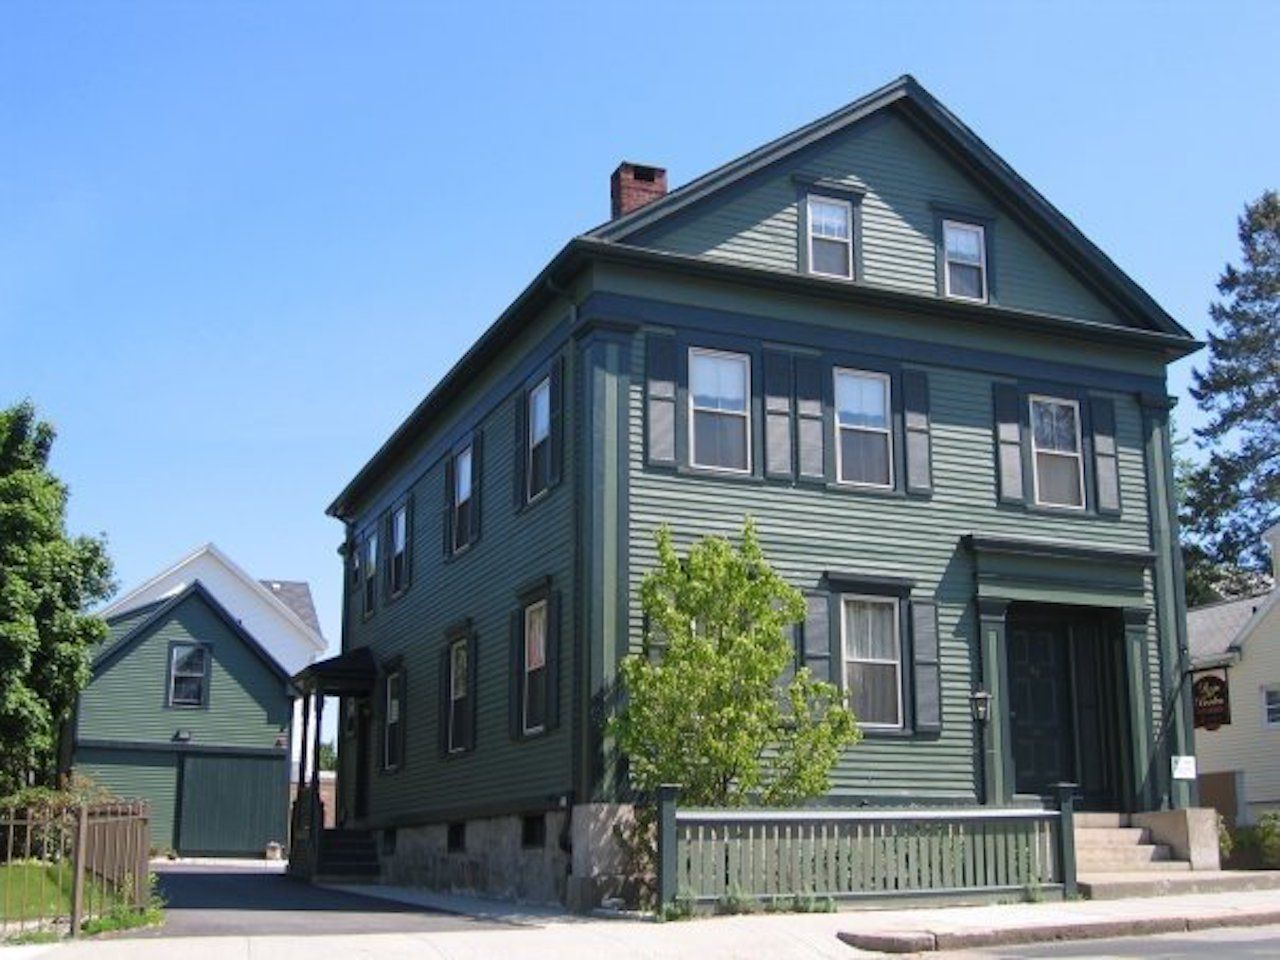 Lizzie Borden Bed and Breakfast and Museum 